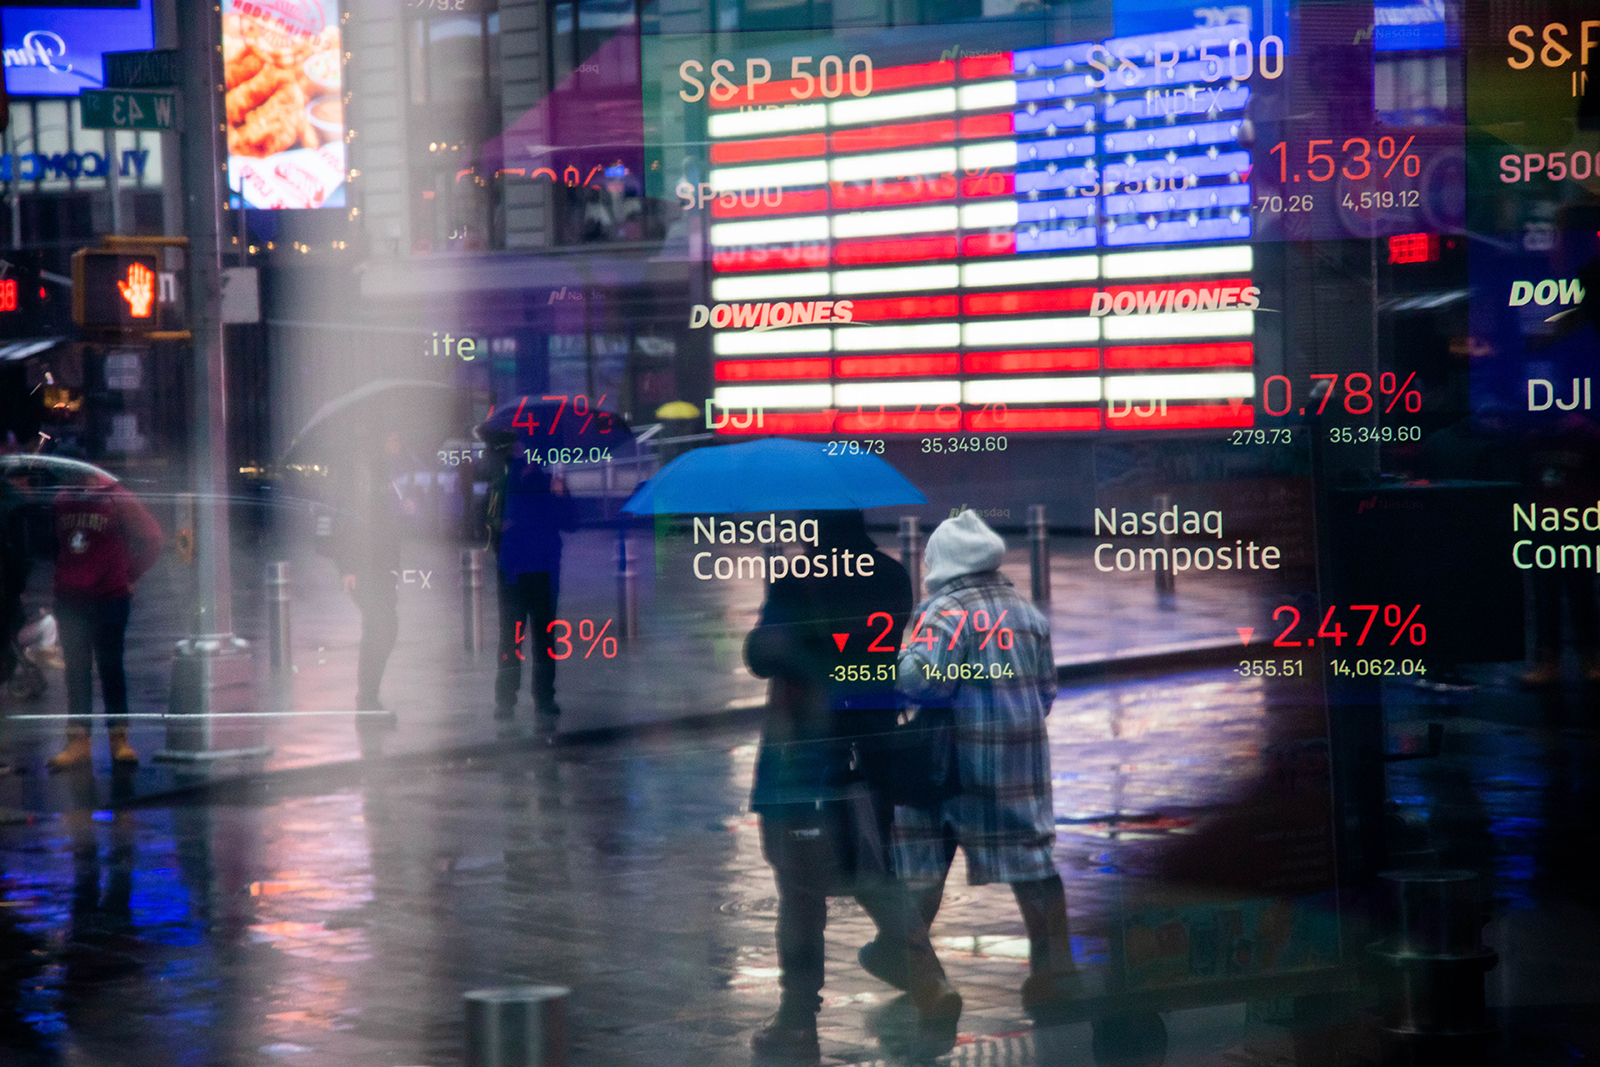 Stock market information is displayed at the Nasdaq MarketSite in New York on February 3.